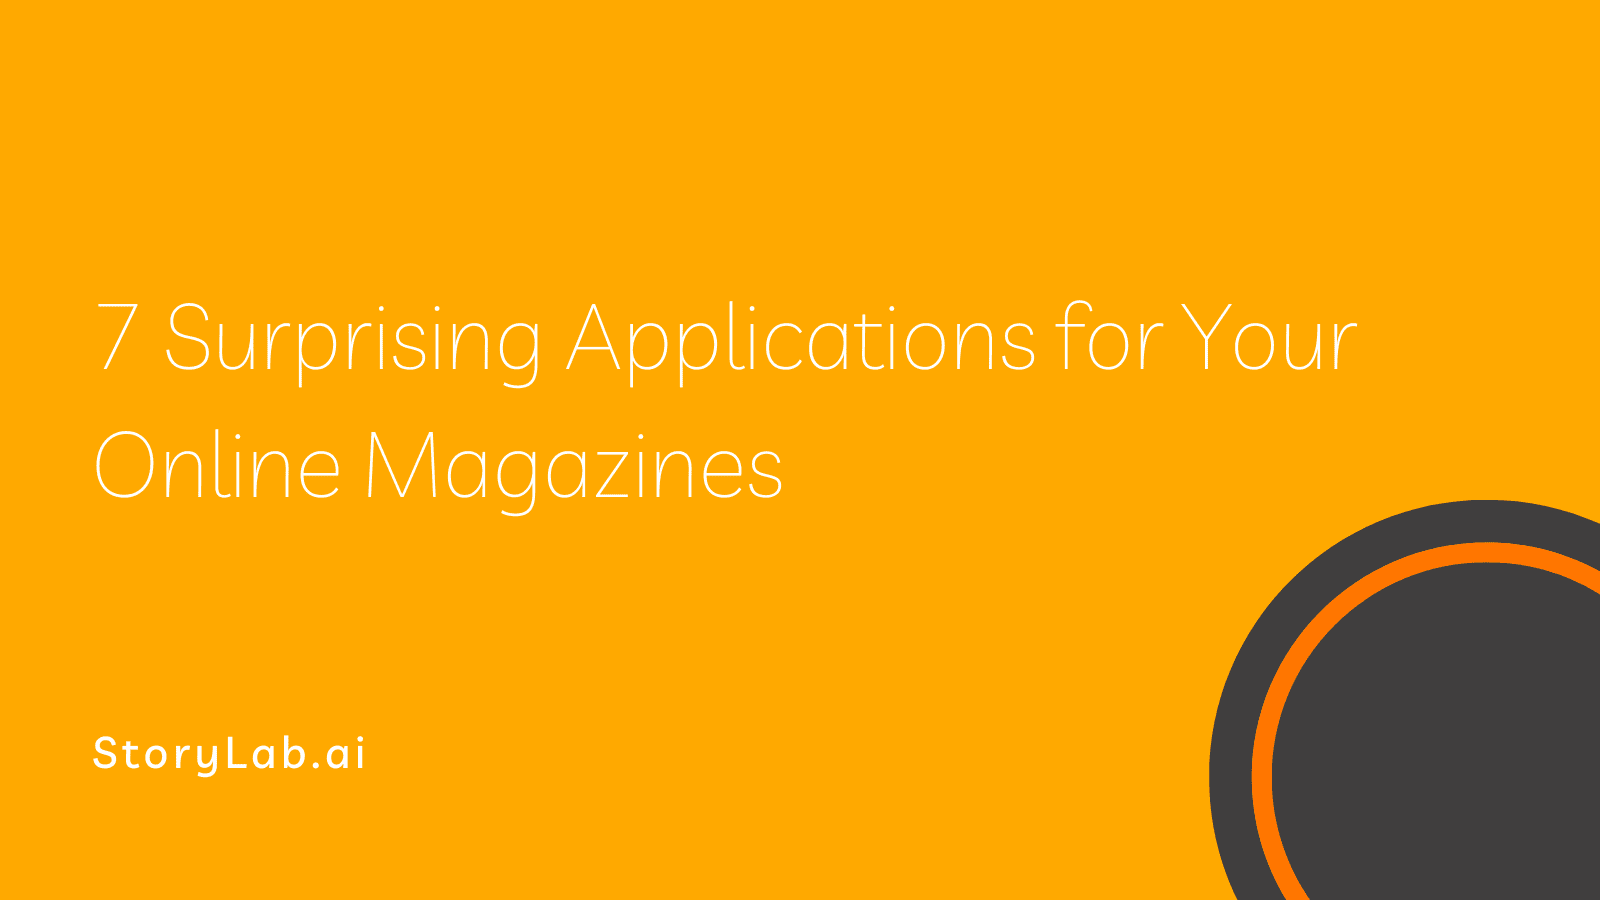 7 Surprising Applications for Your Online Magazines